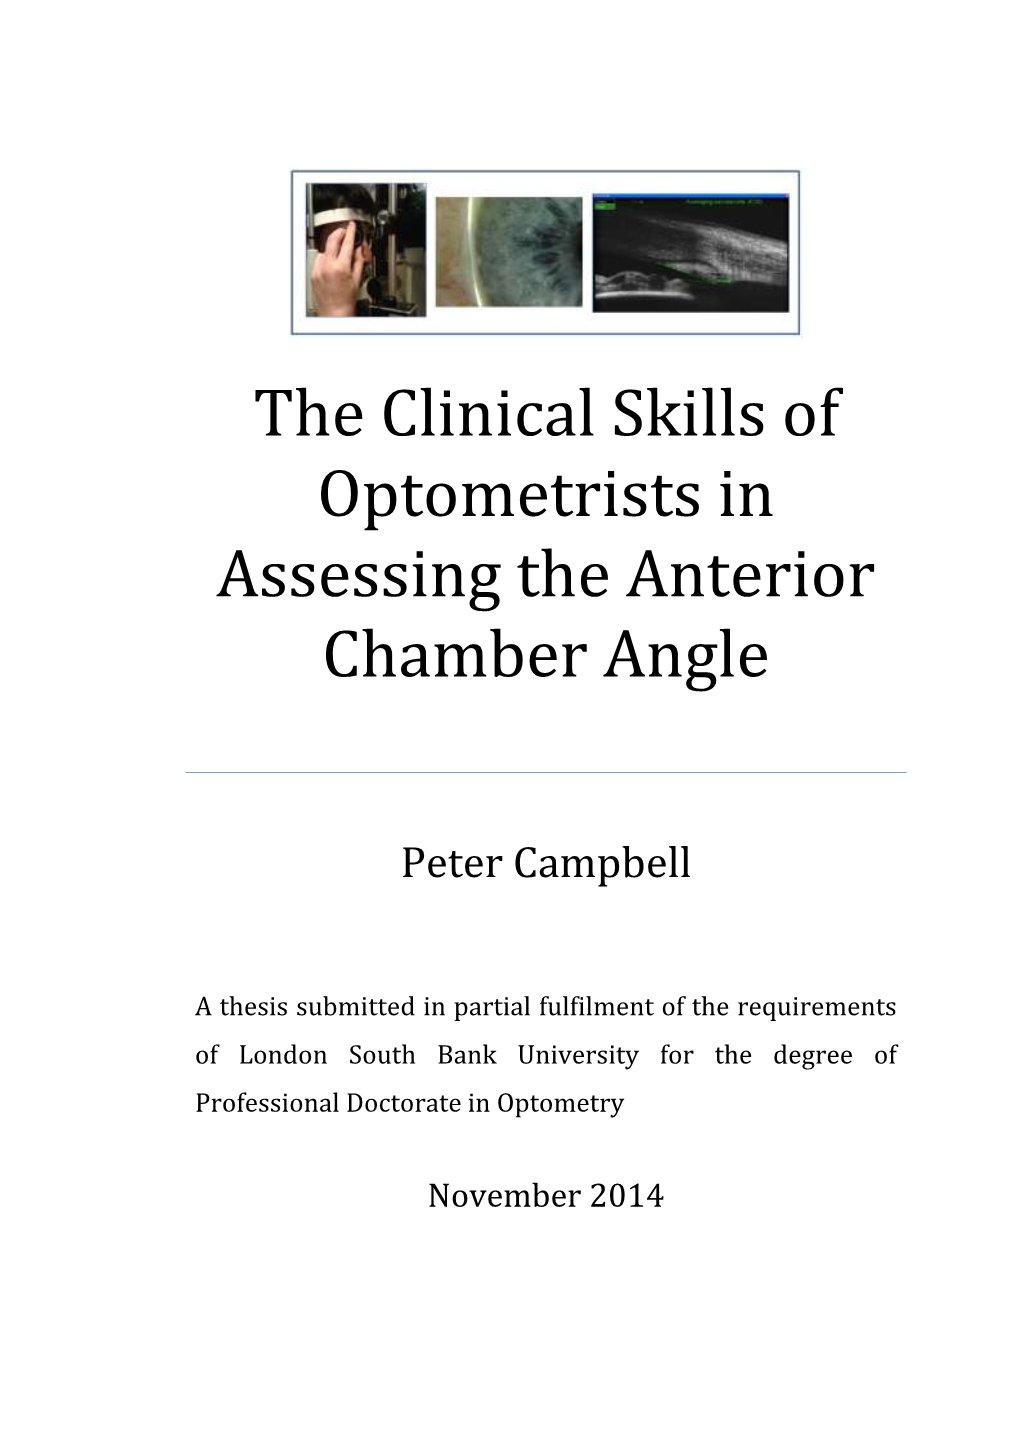 The Clinical Skills of Optometrists in Assessing the Anterior Chamber Angle